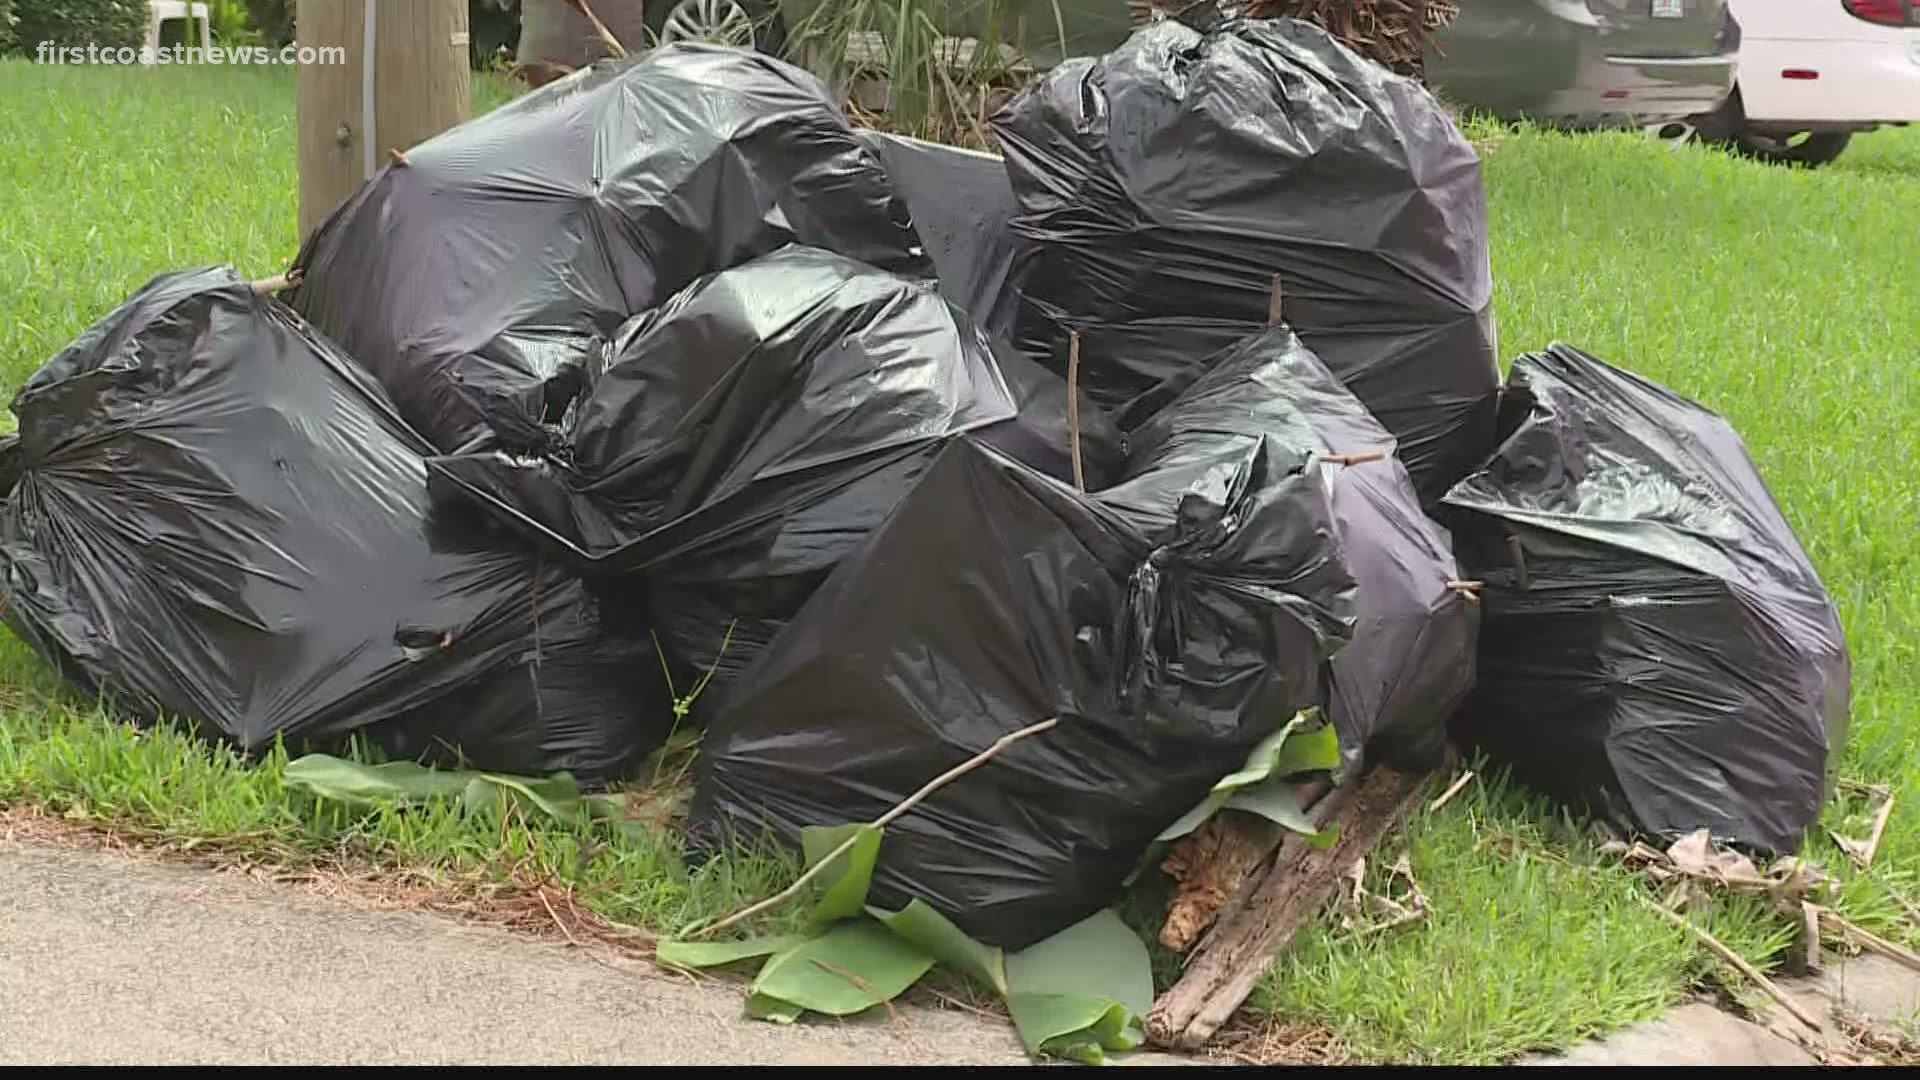 Since January, the city has received 26,043 missed yard waste or missed household garbage complaints.